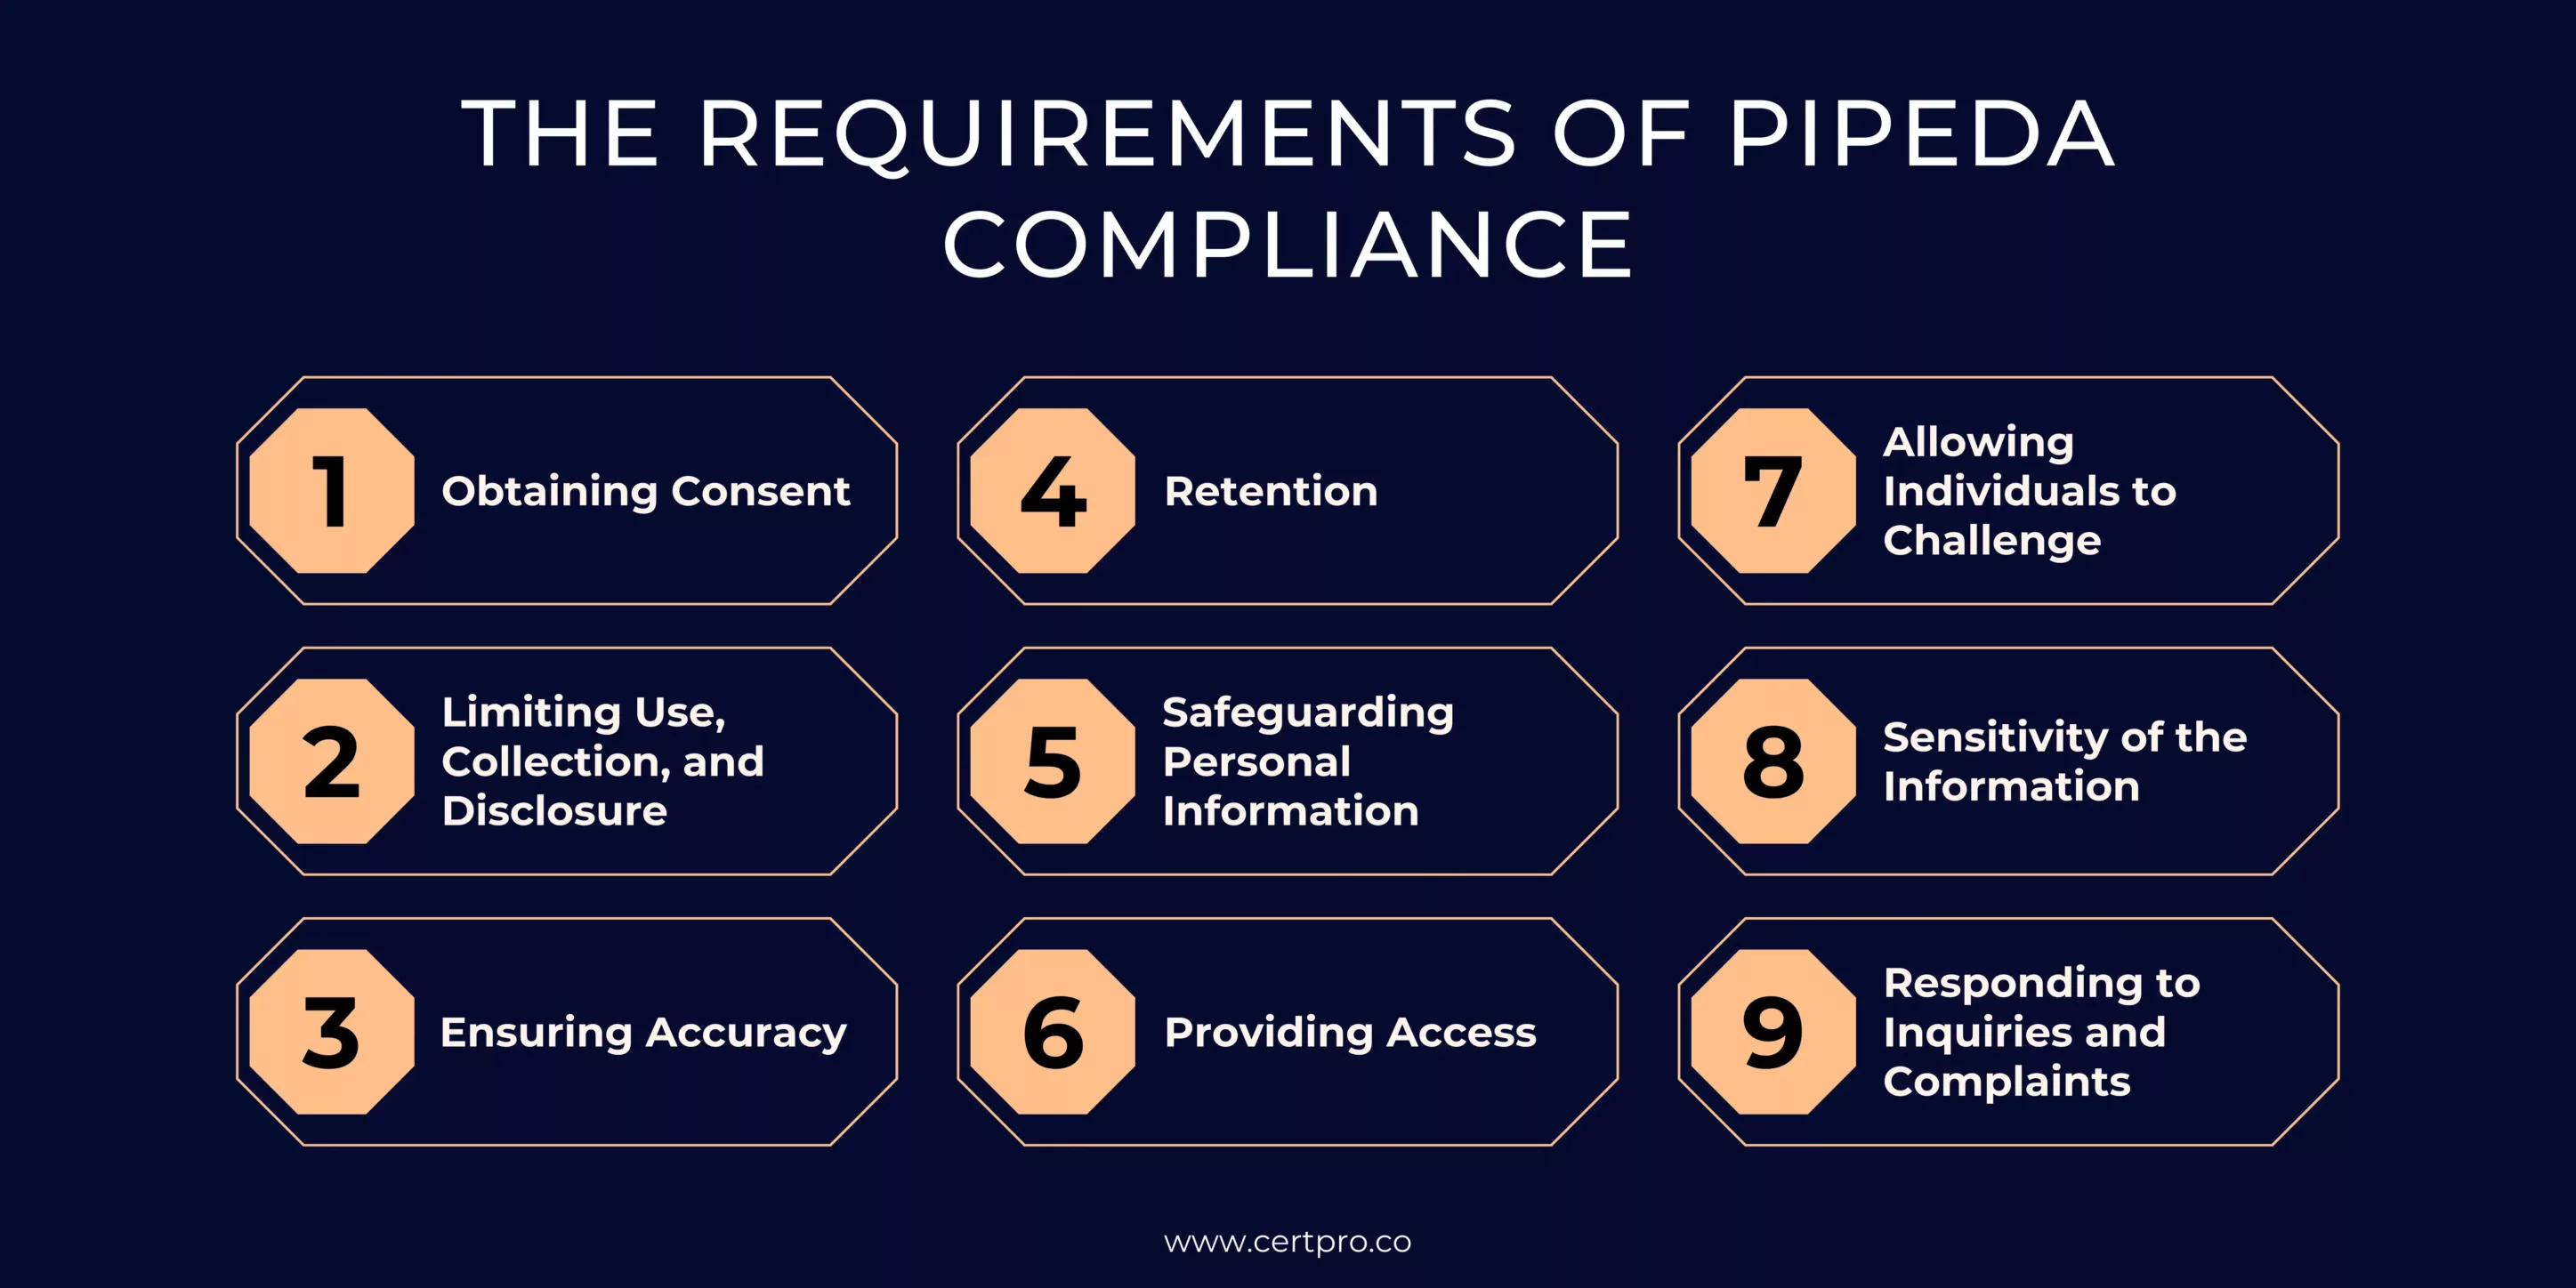 REQUIREMENTS OF PIPEDA